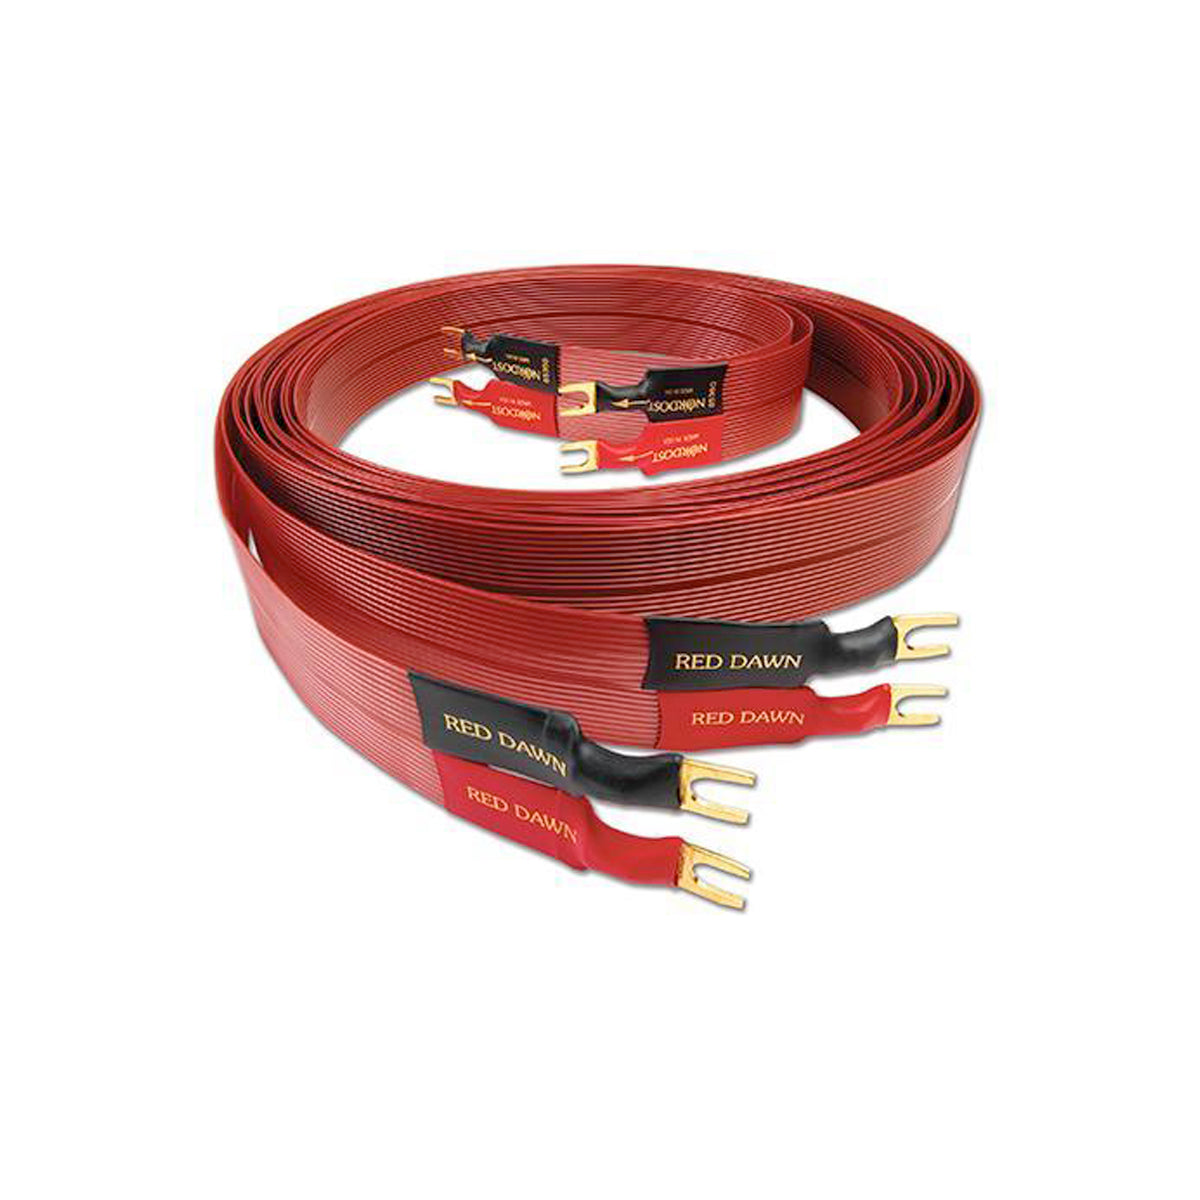 Nordost Red Dawn Speaker Cable - The Audio Experts